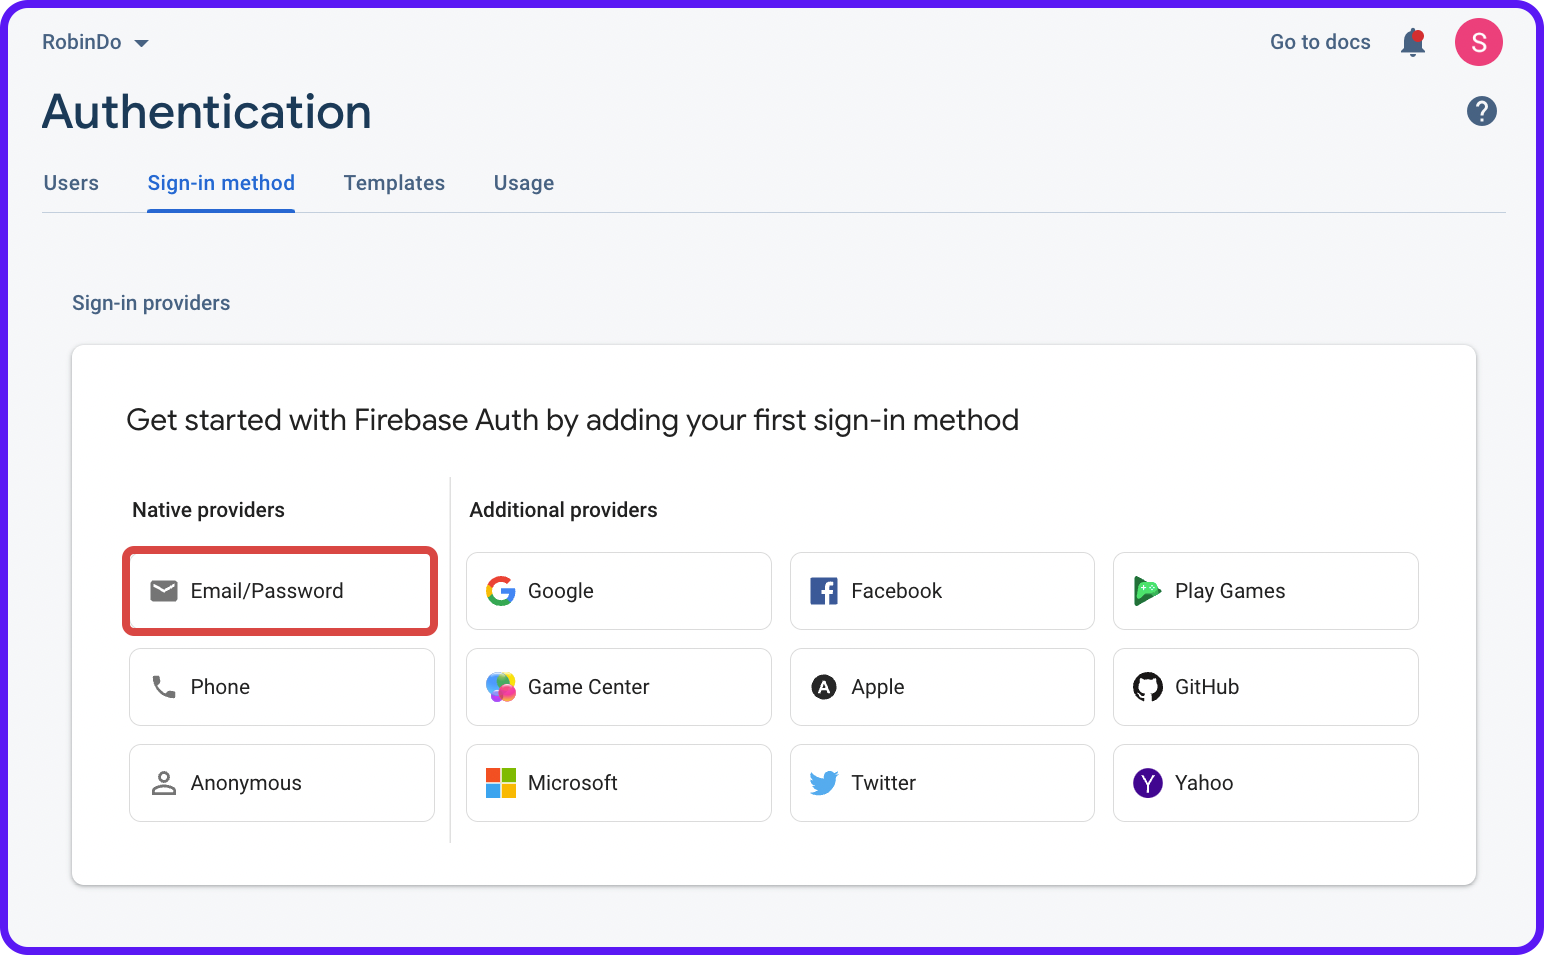 Email/Password provider button on the Firebase Authentication page